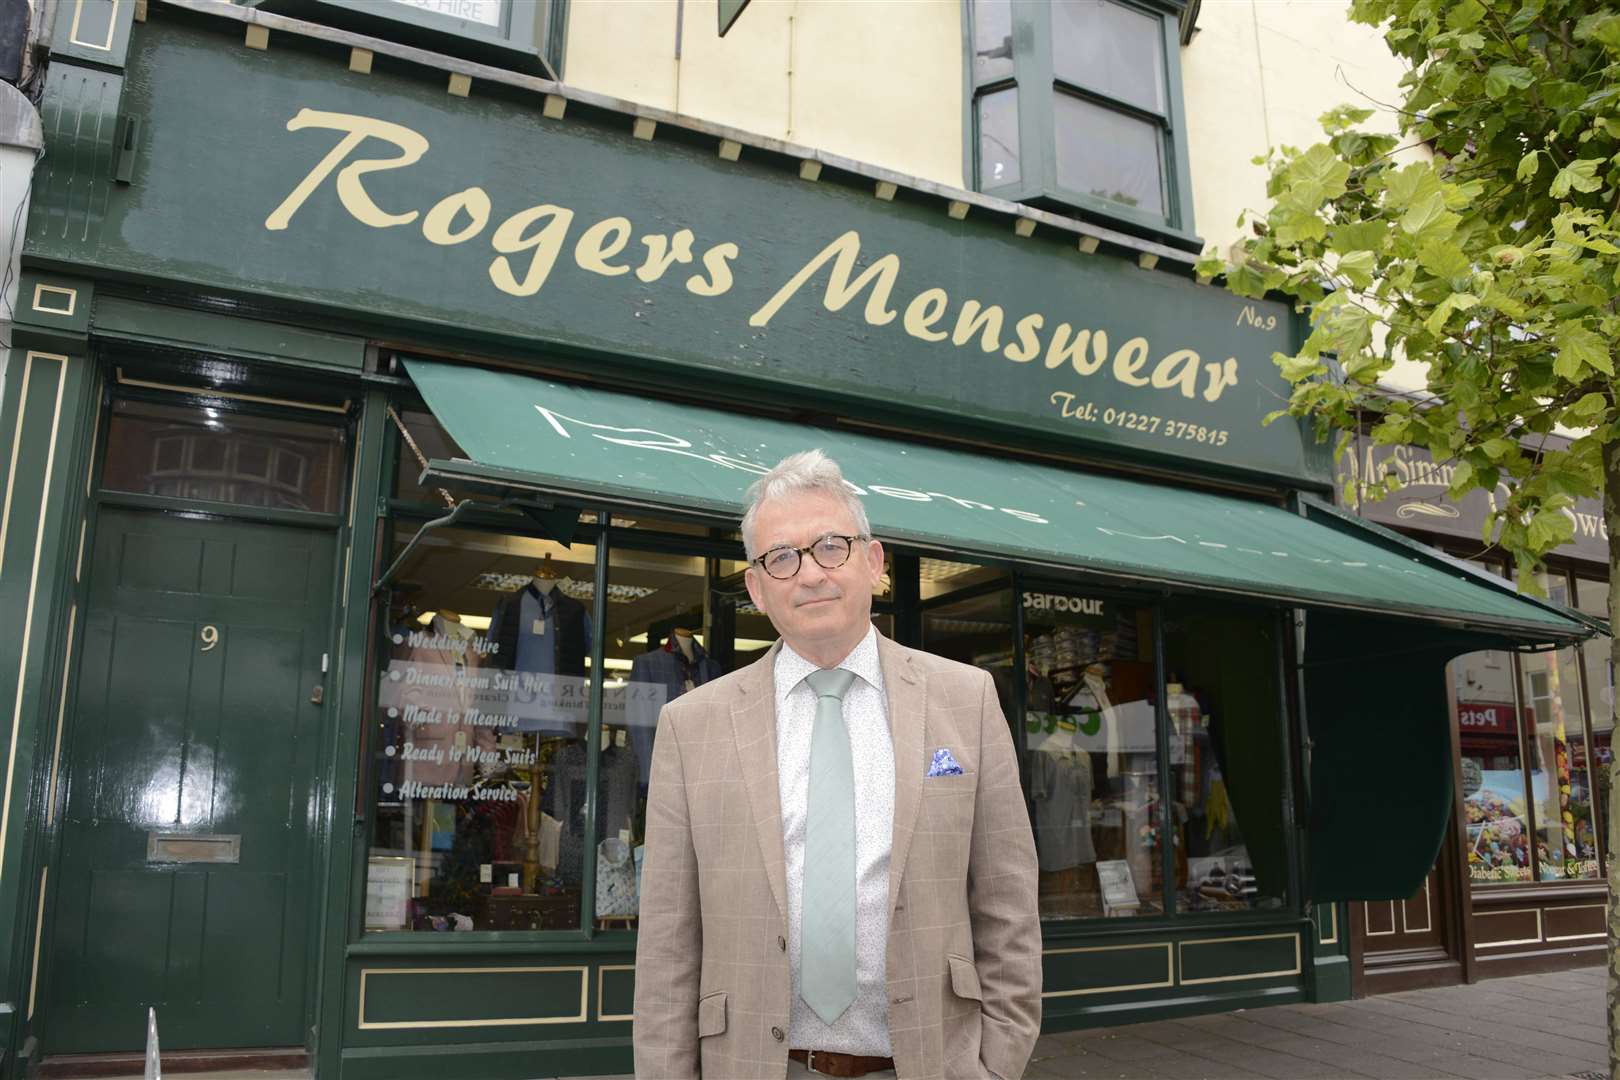 The Roger's Menswear store will survive the pandemic, says owner Tony Symons